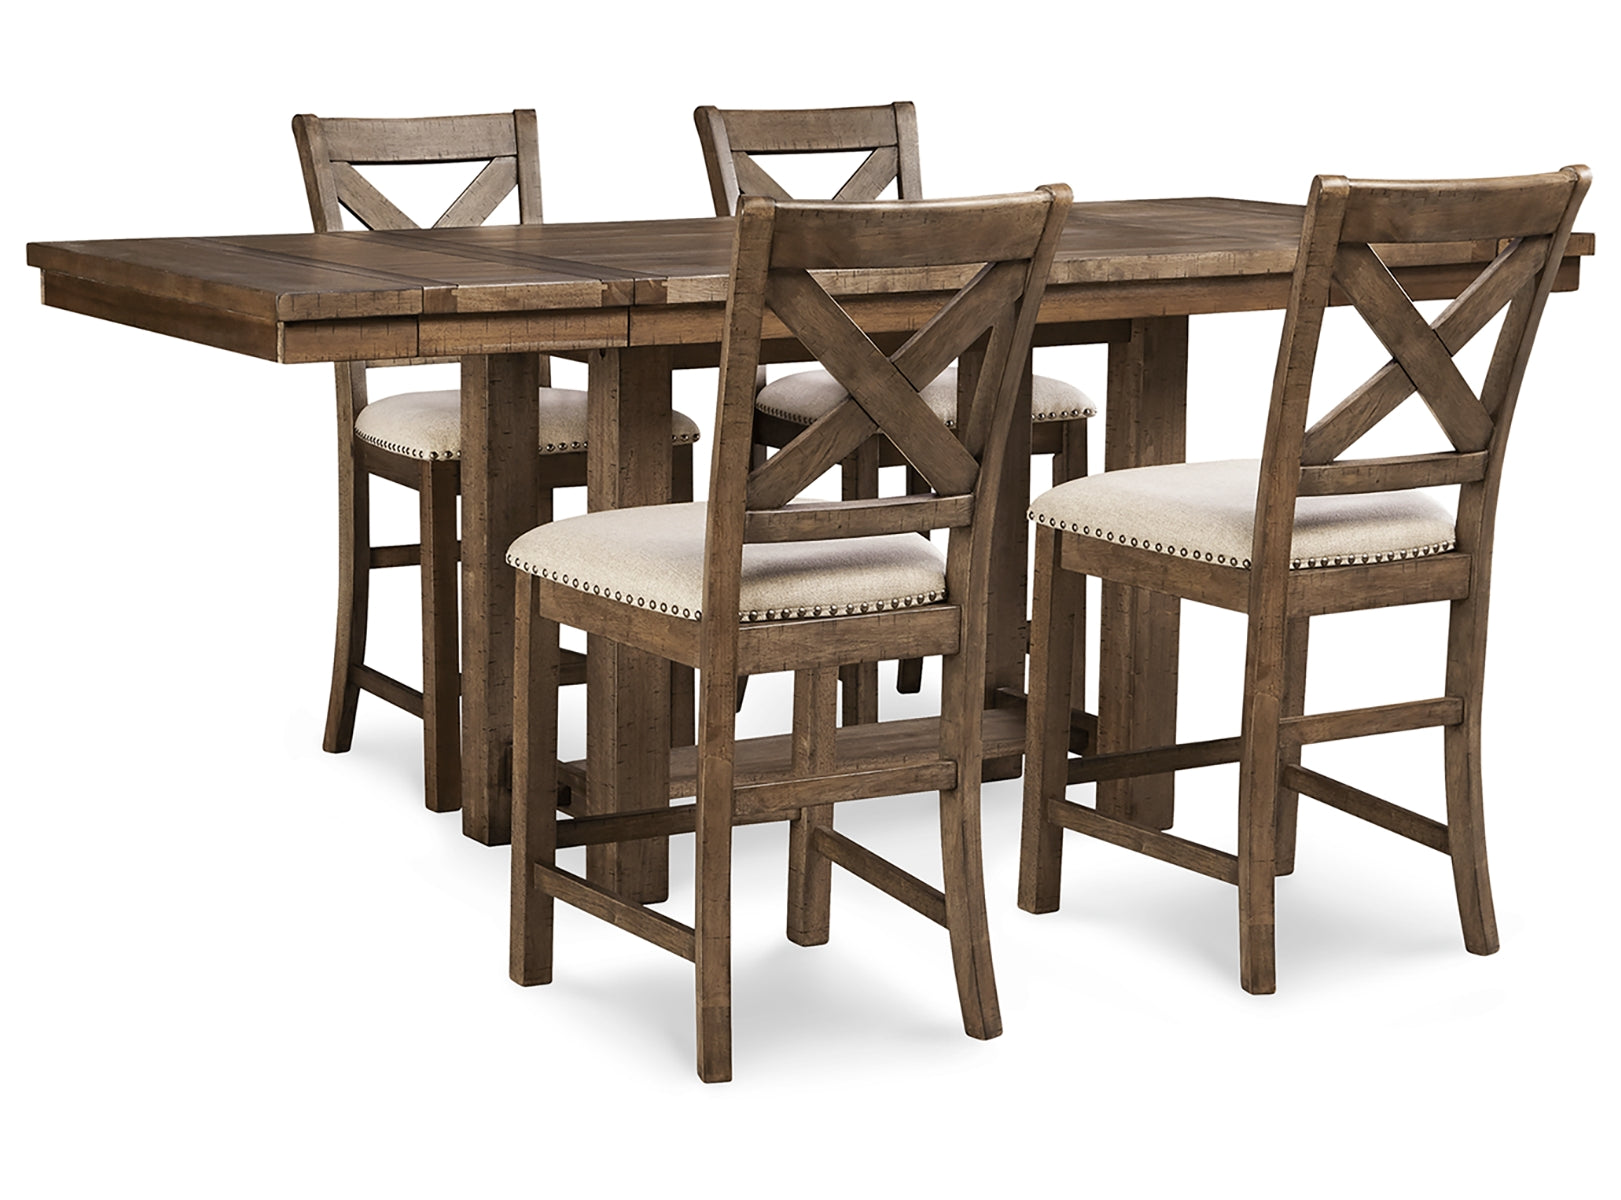 Moriville Counter Height Dining Table and 4 Barstools